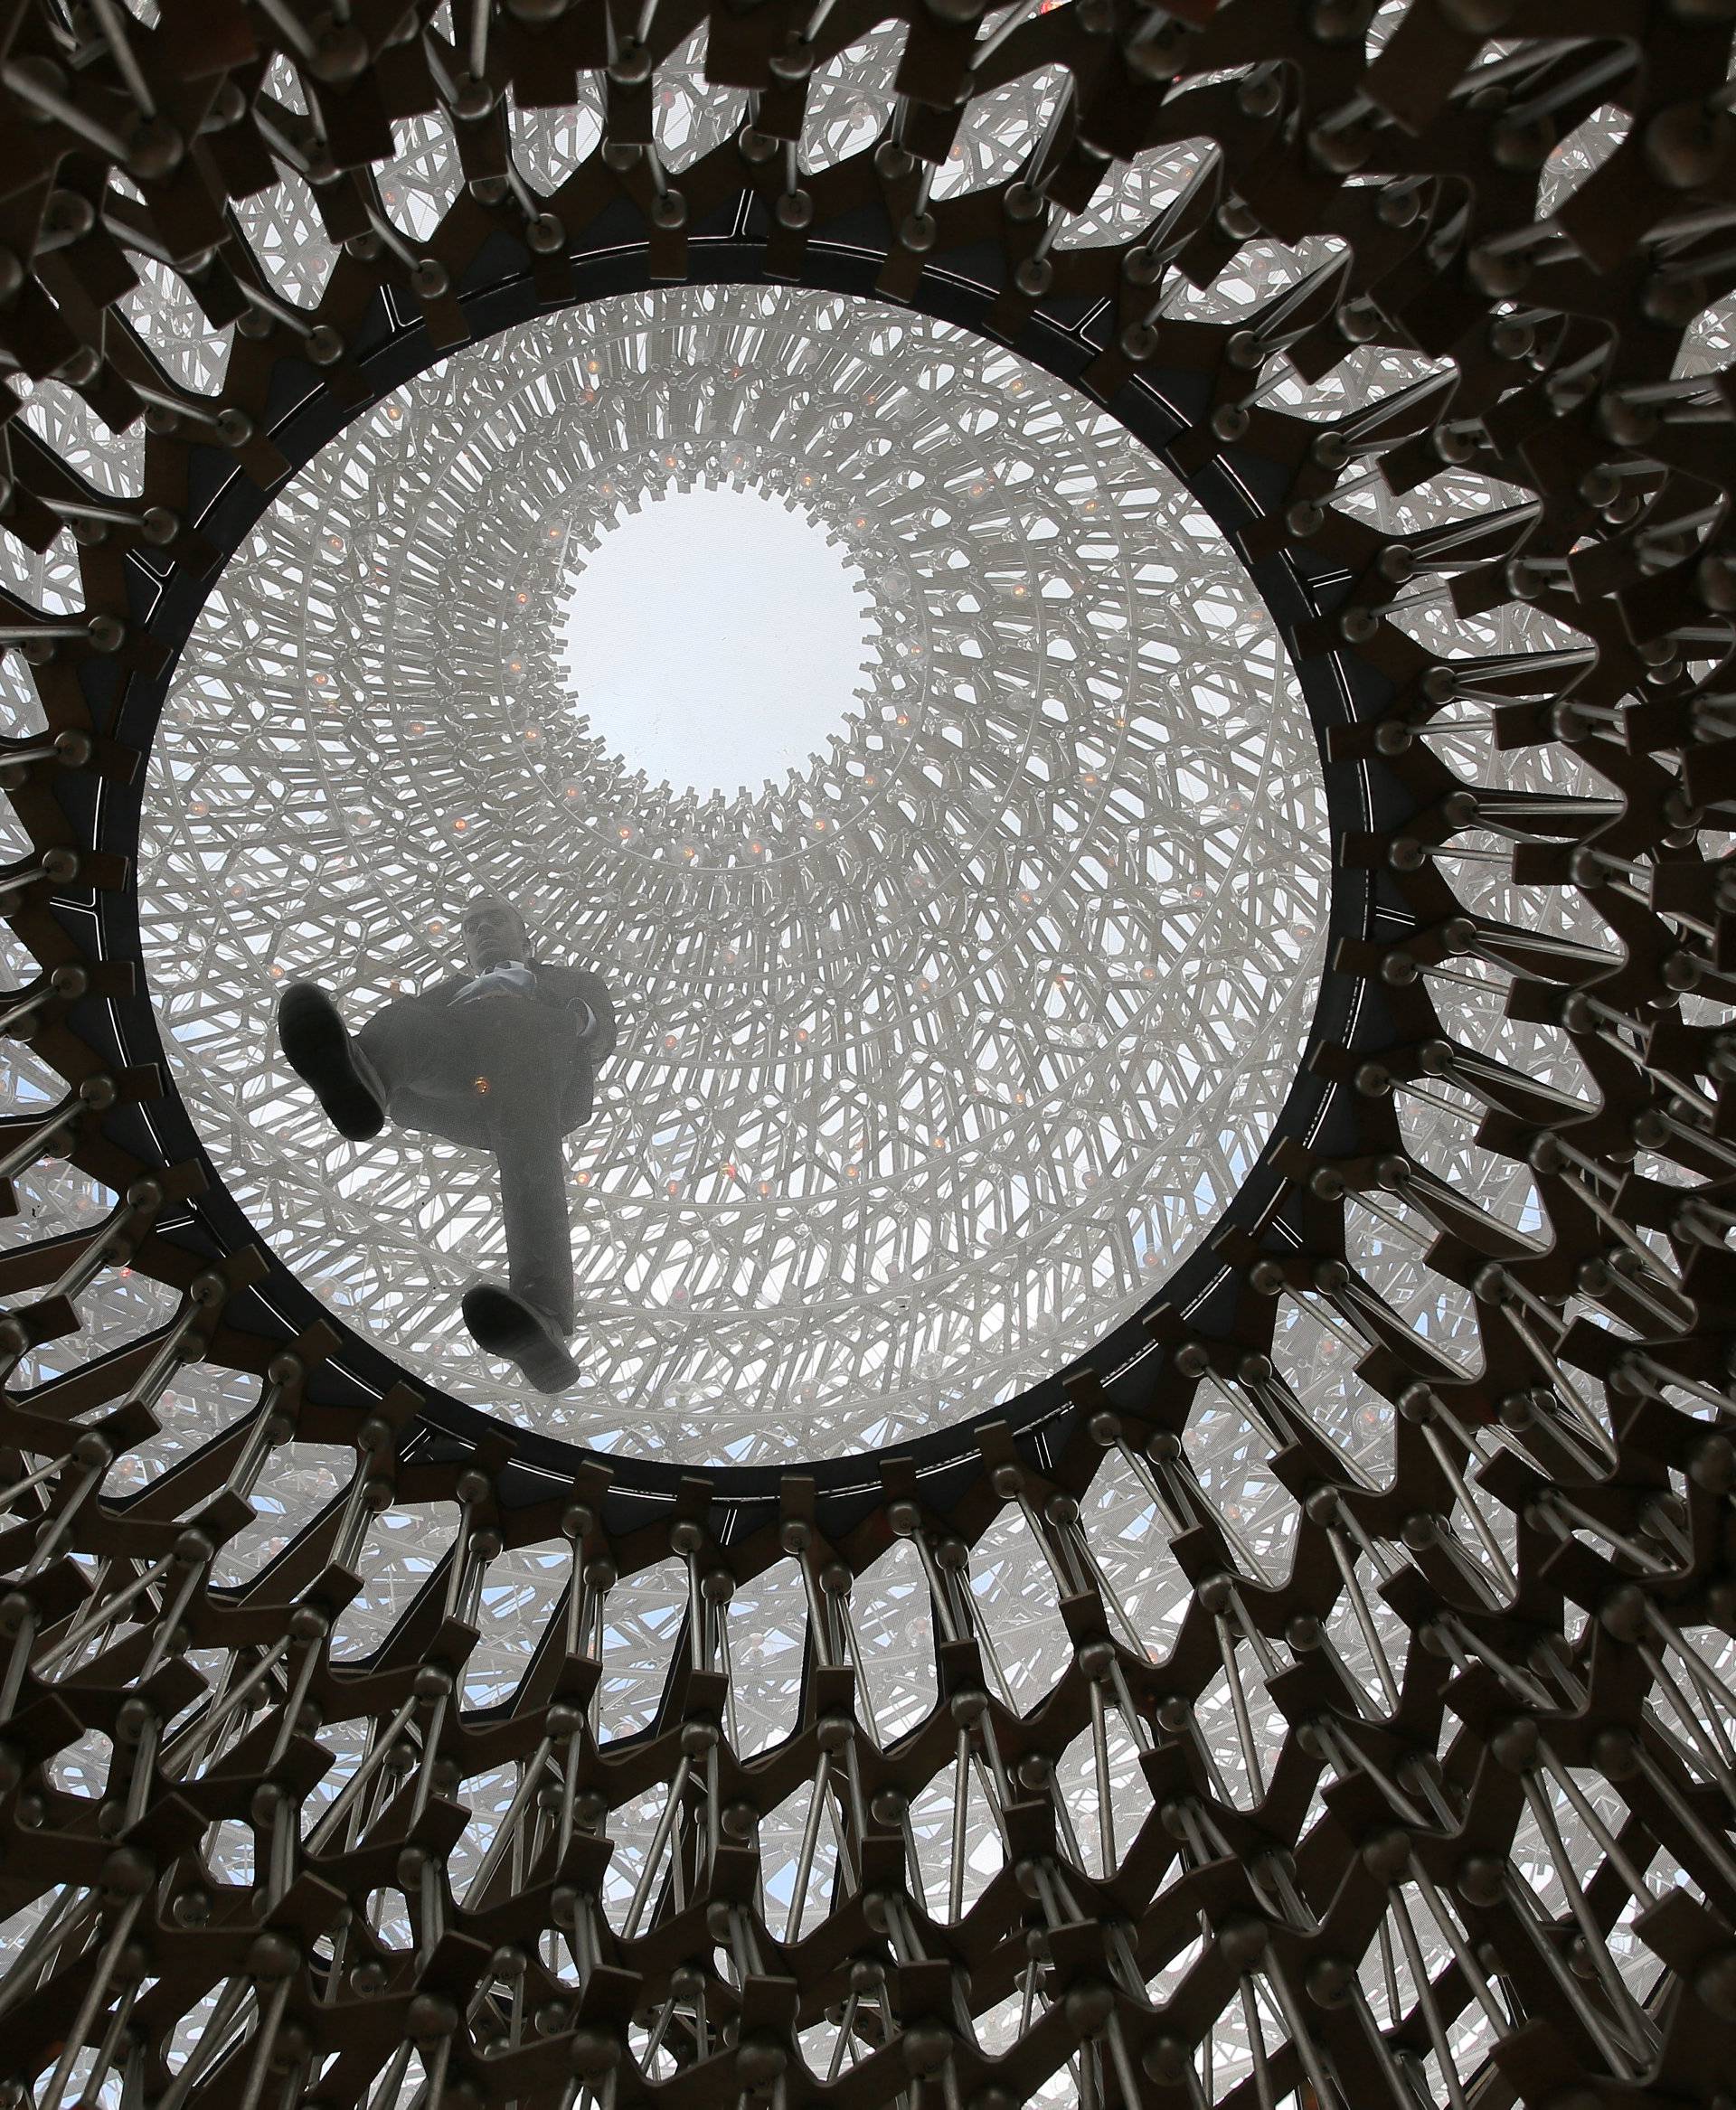 A visitor interacts with Wolfgang Buttress' sculpture The Hive at Kew Gardens in London